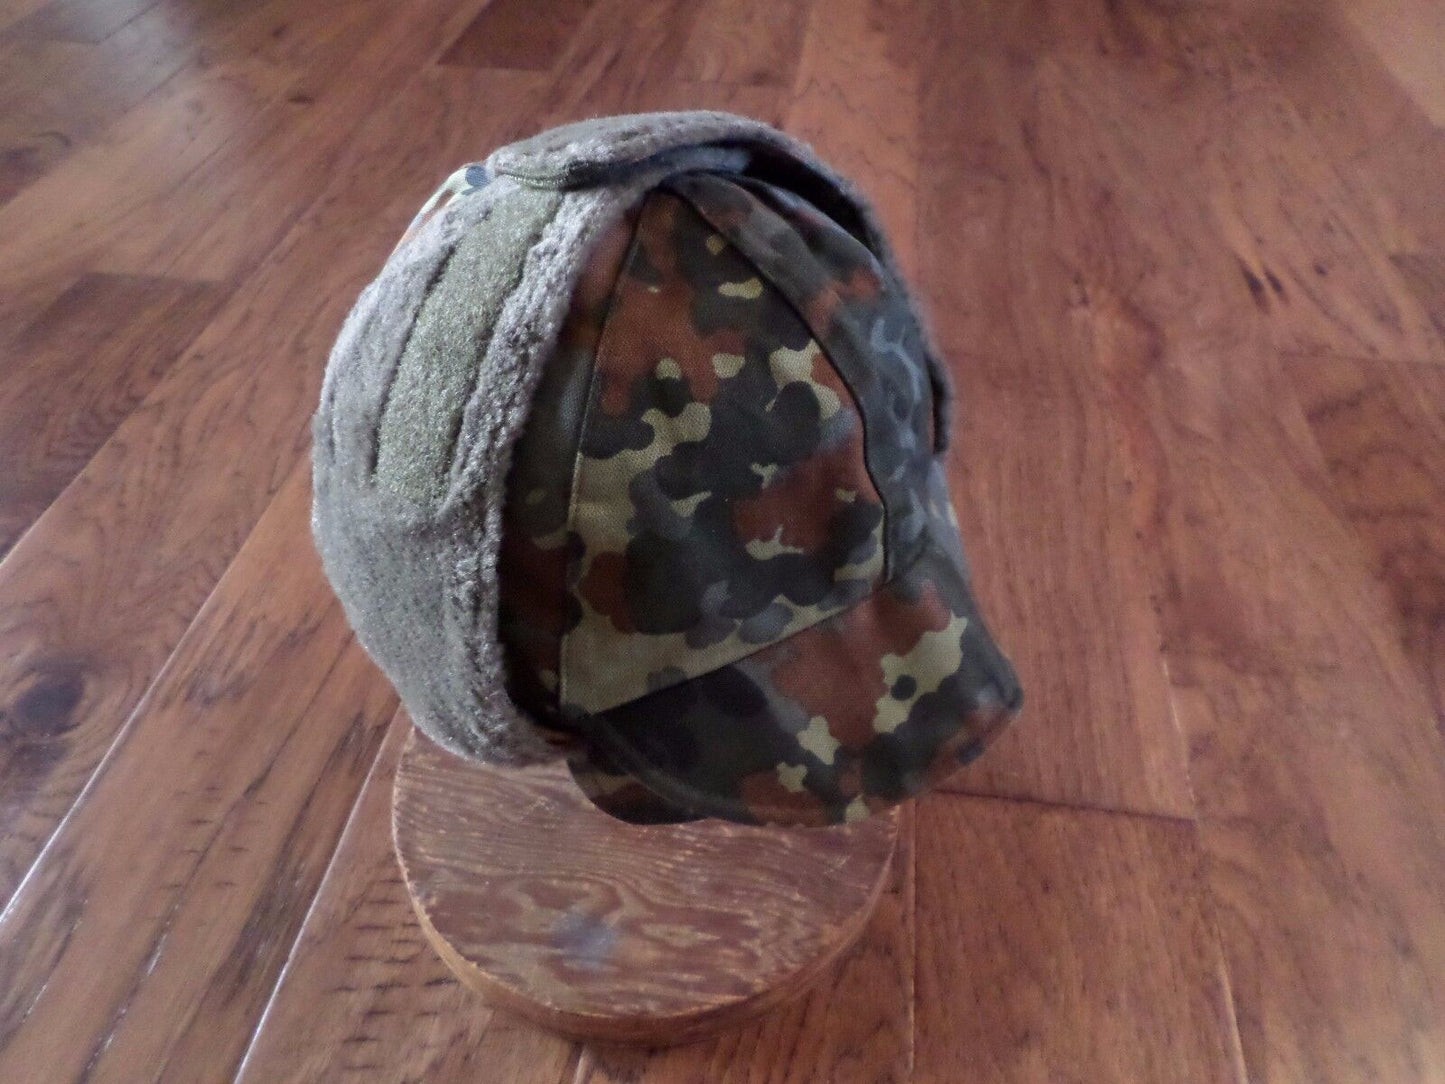 GENUINE GERMAN MILITARY FLECTARN CAMOUFLAGE WINTER CAP/HAT EAR FLAPS SIZE 7 1/2